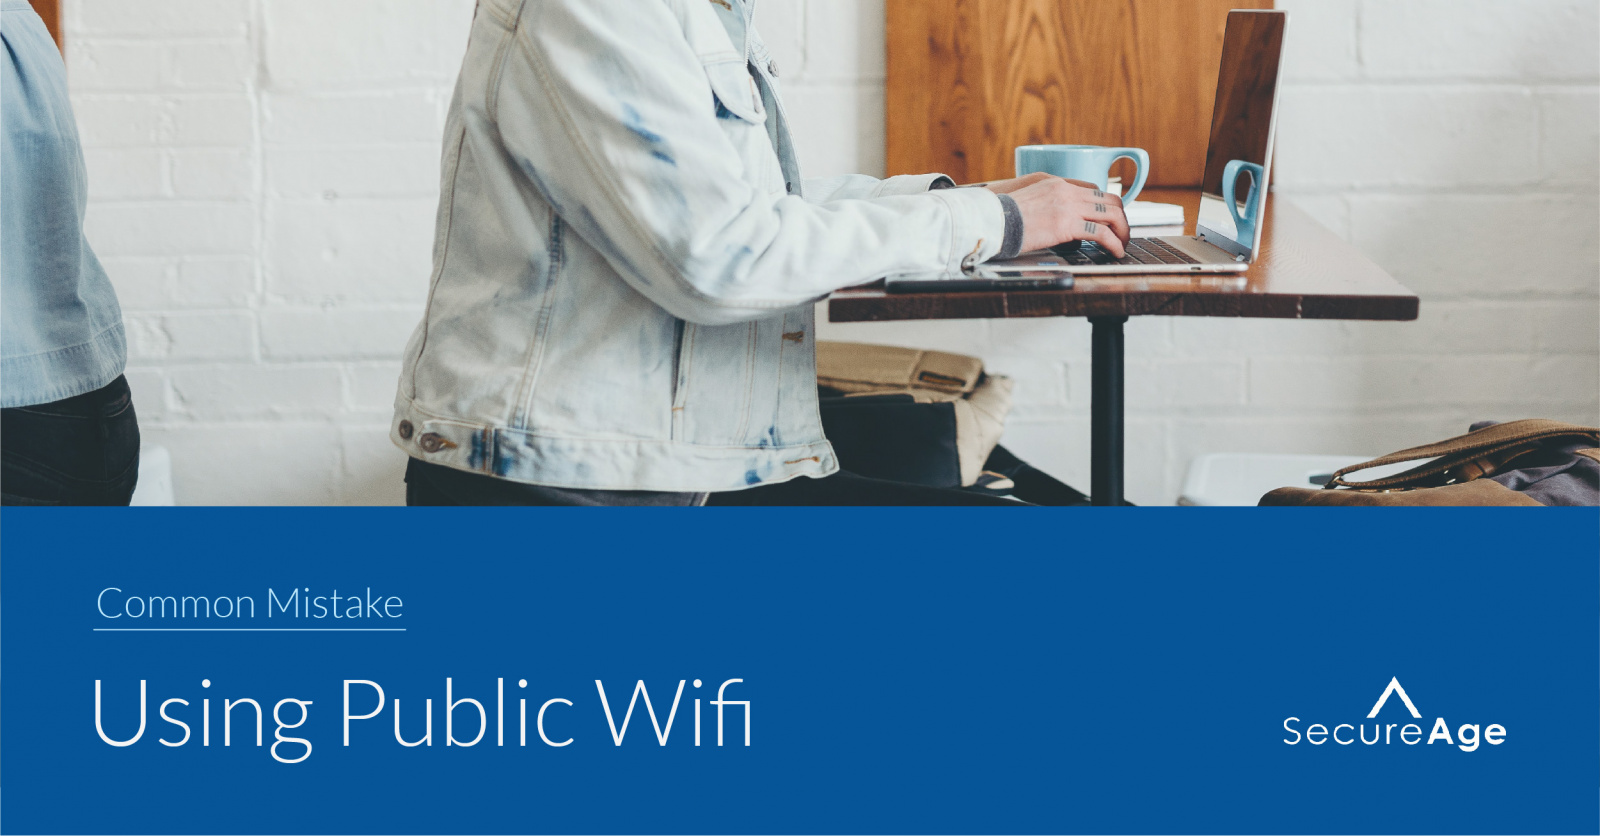 Mistakes humans make with data – Mistake #1: Using public Wi-Fi